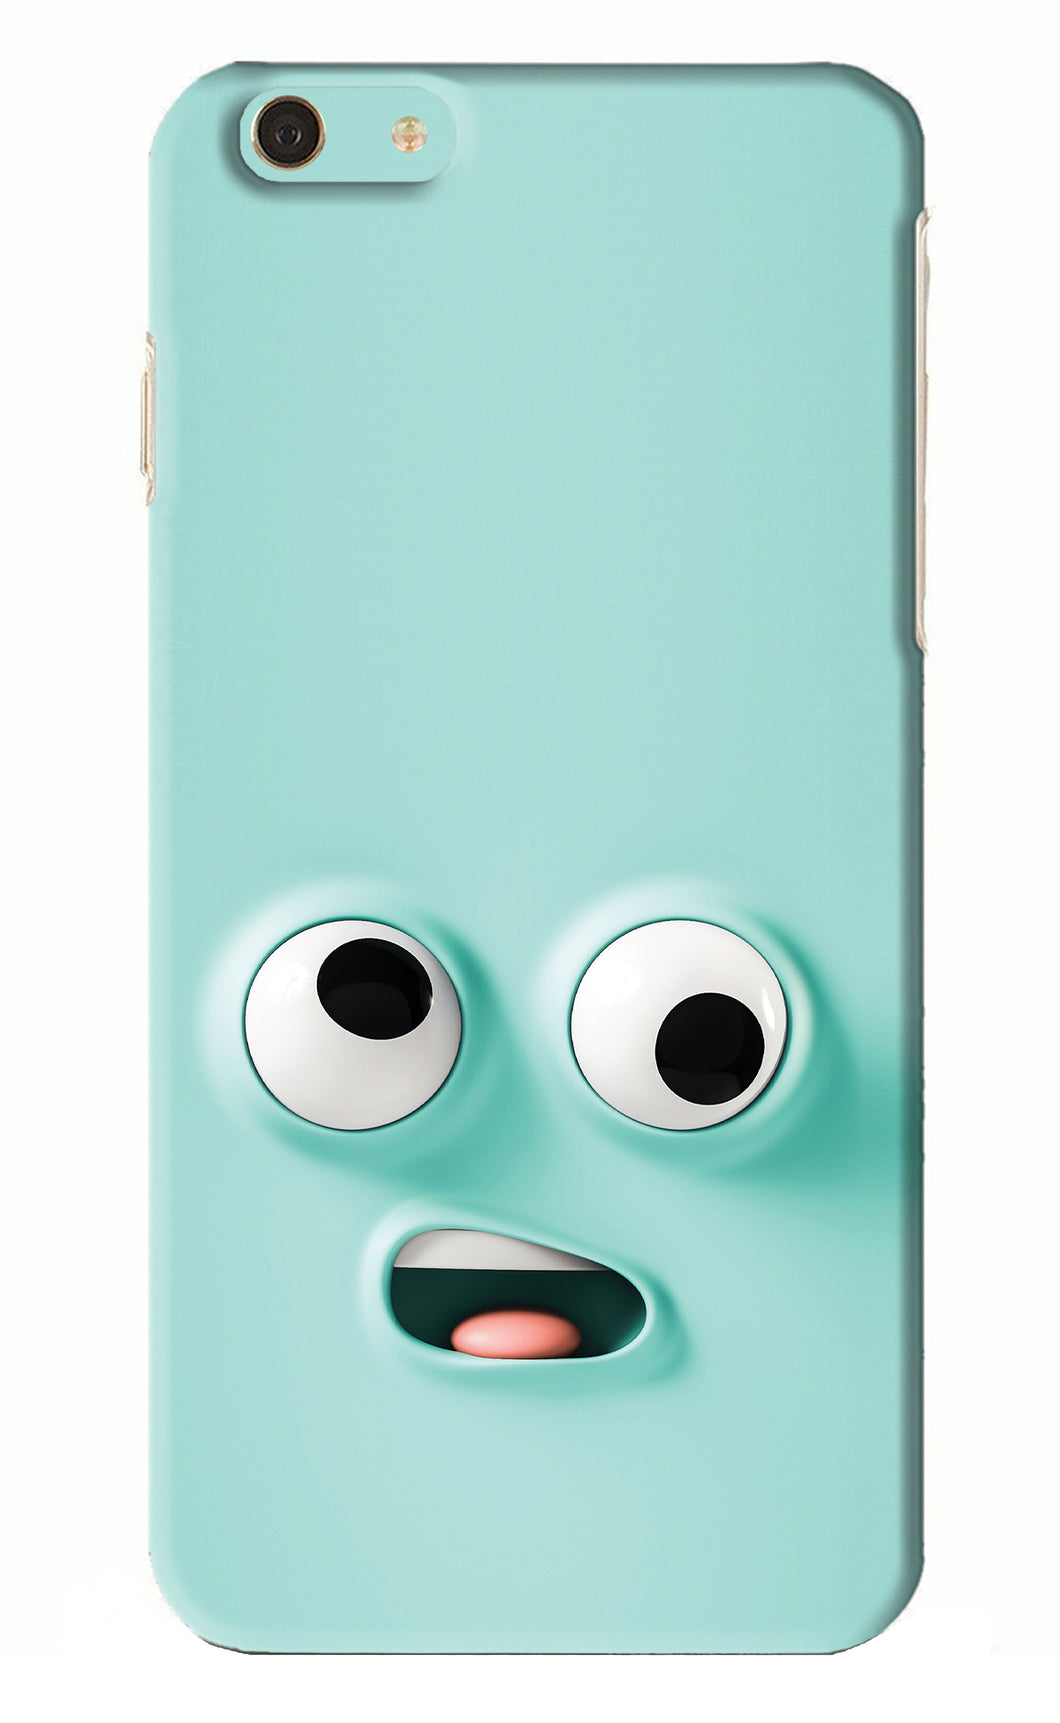 Silly Face Cartoon iPhone 6S Plus Back Skin Wrap